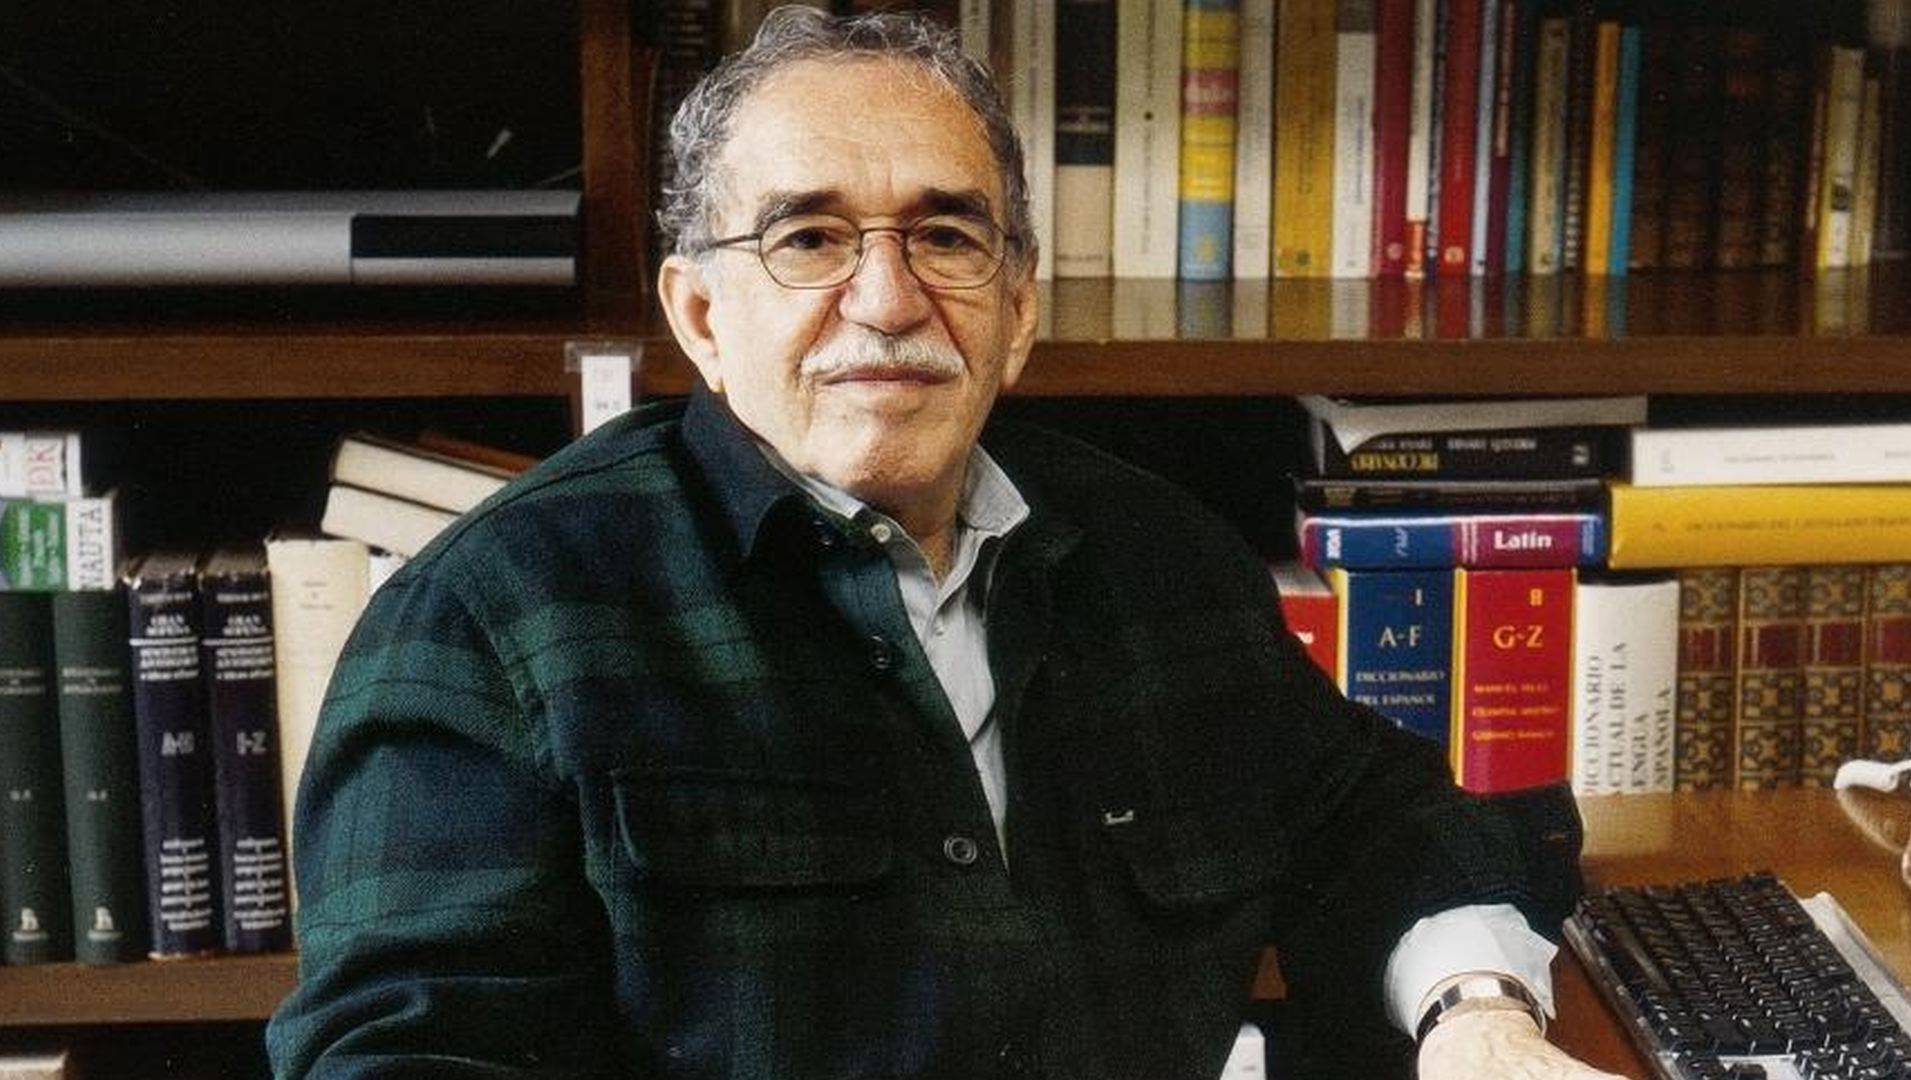 Gabriel Garc­a Márquez in His Own Words on Writing “100 Years of Solitude”